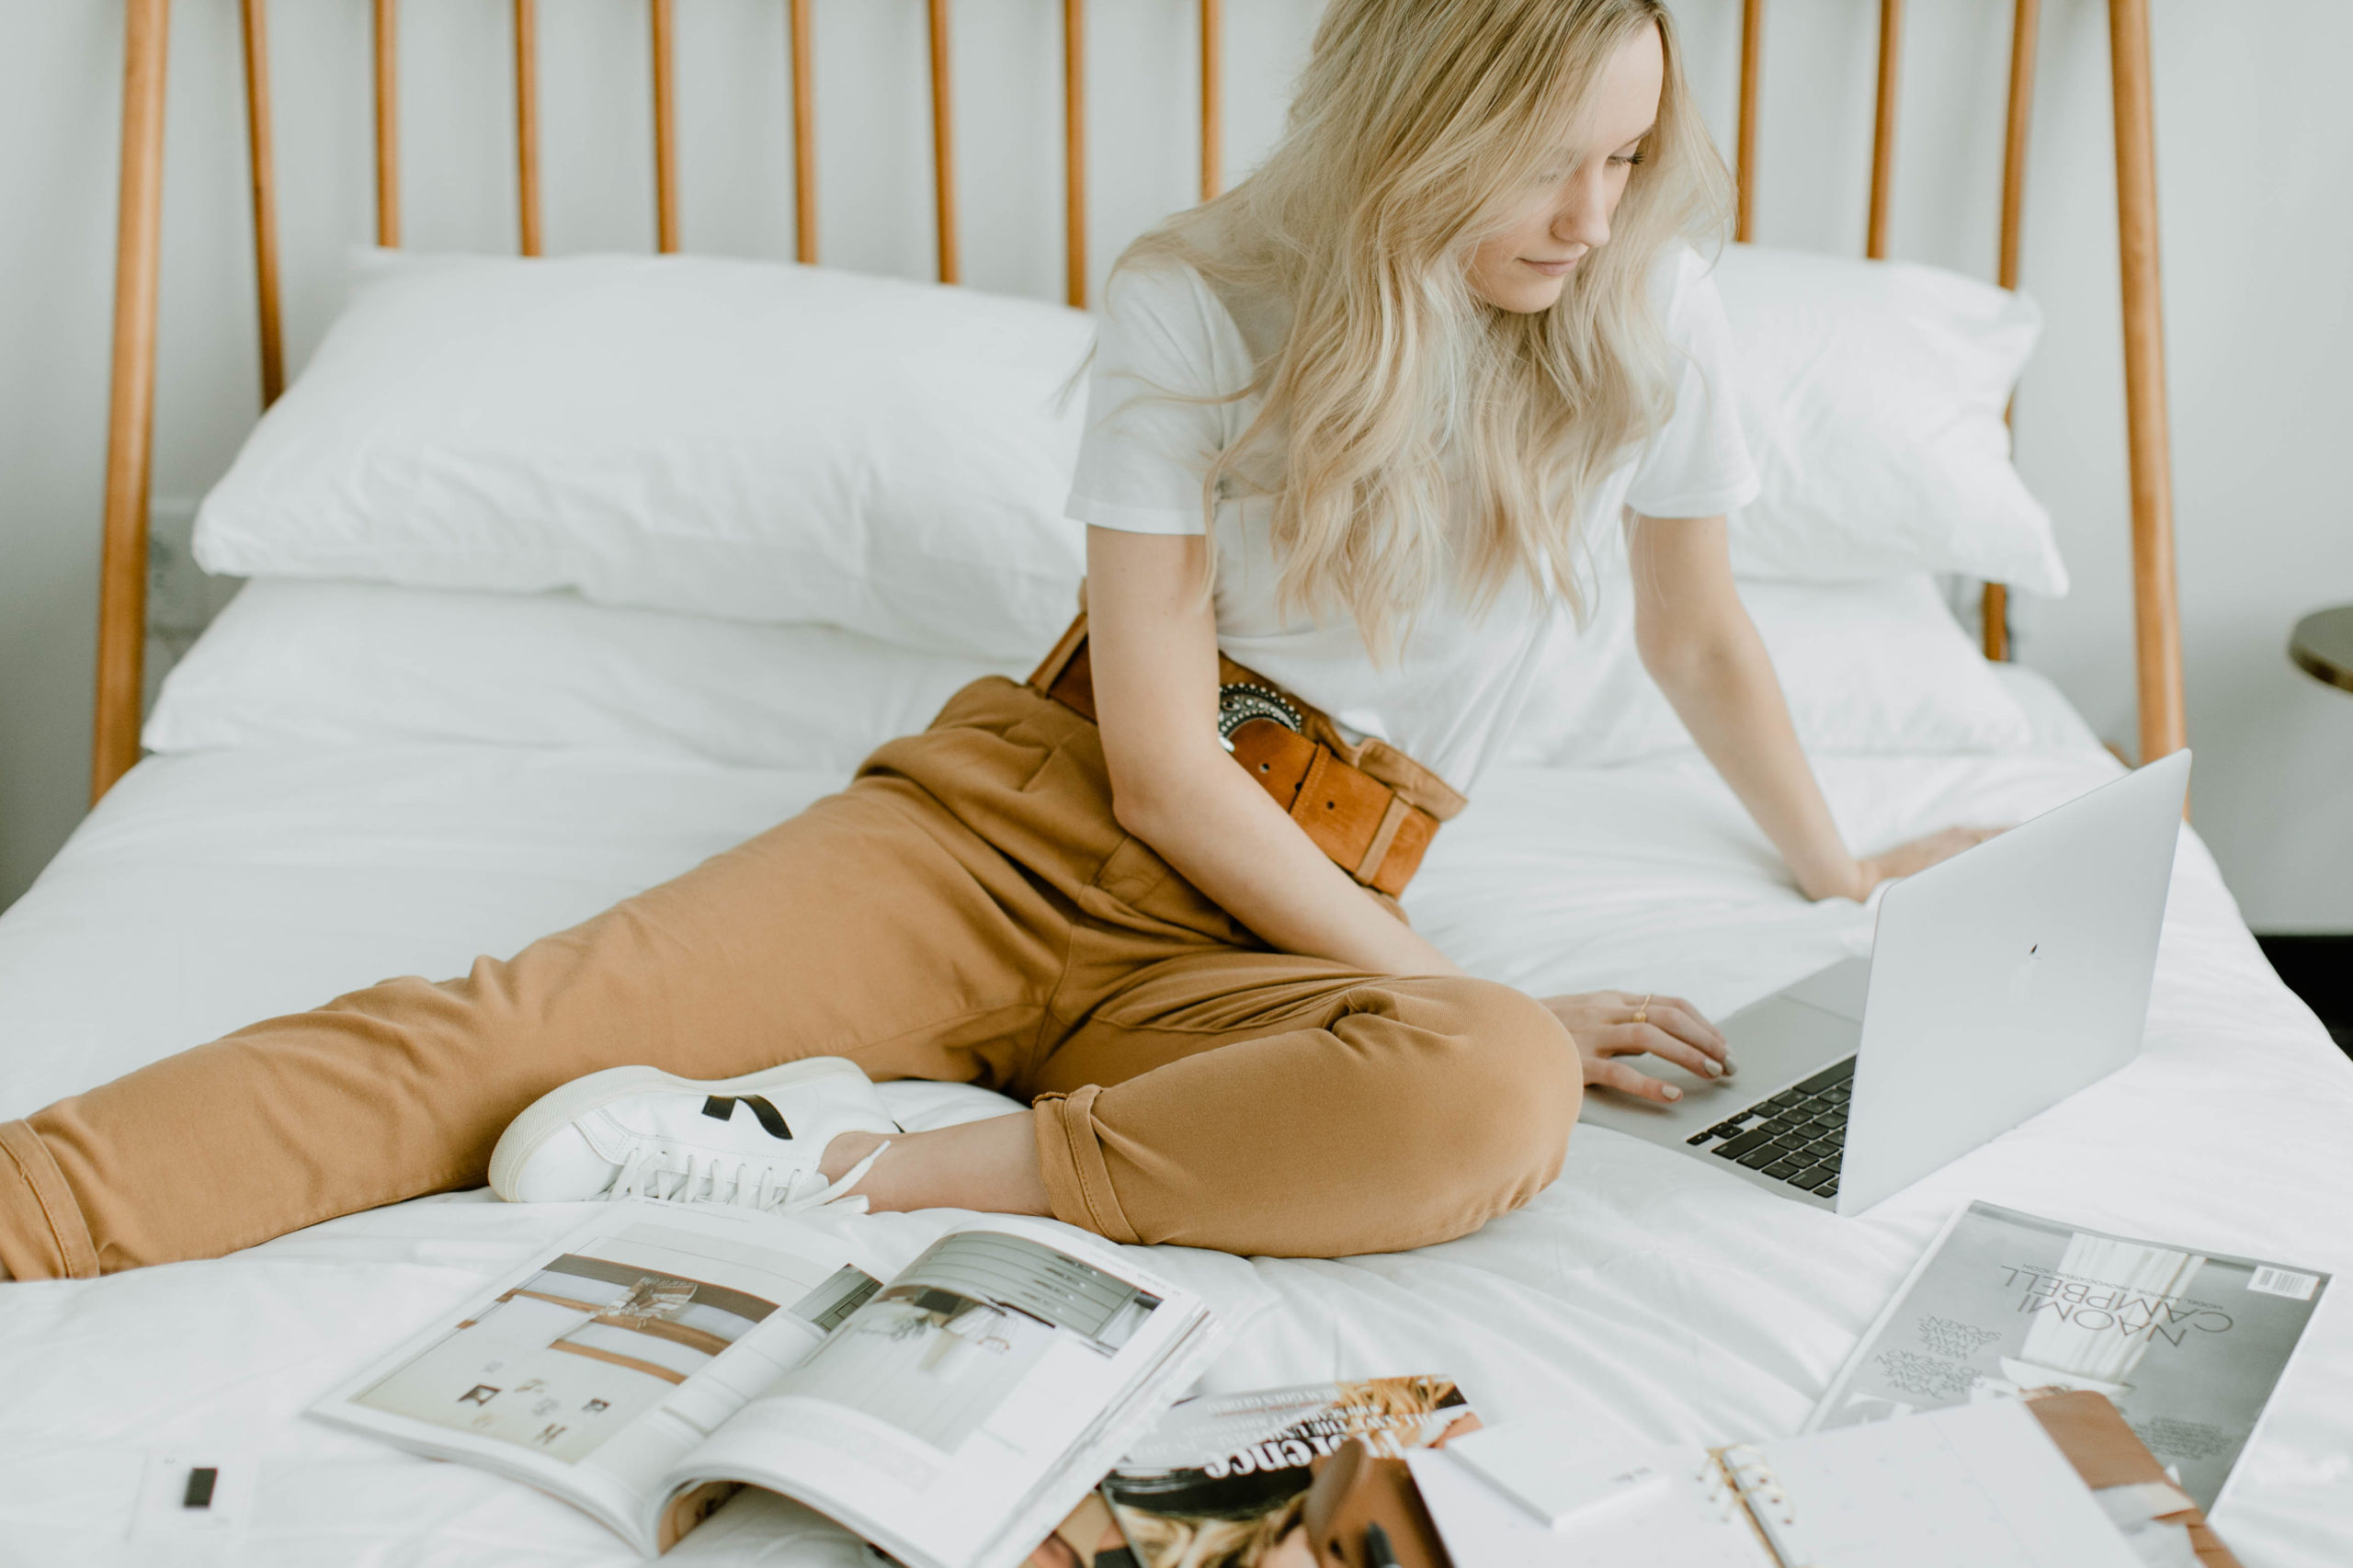 Image of a woman sitting on a bed surrounded by open magazines and working on a laptop during her brand photography session.